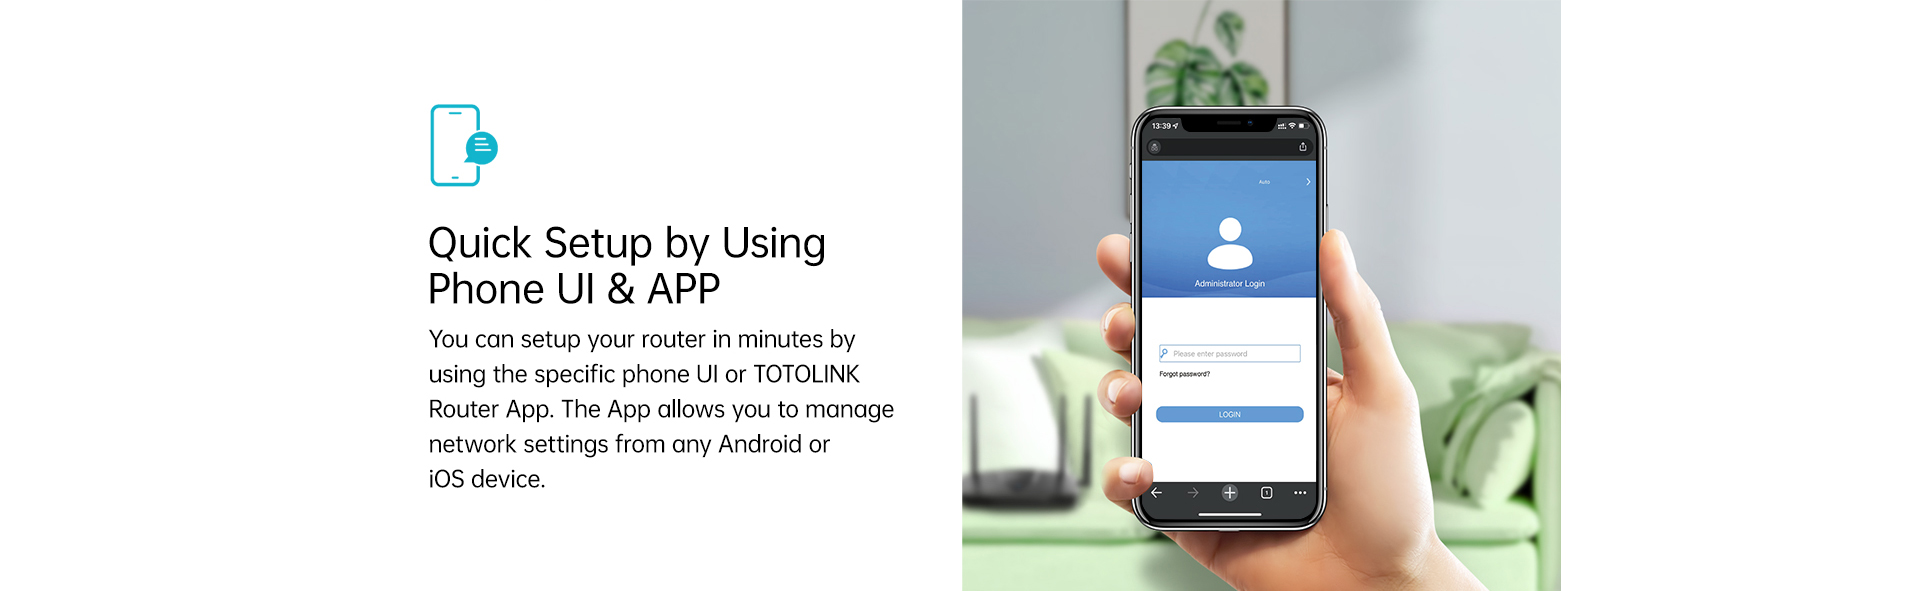 totolink Router APP